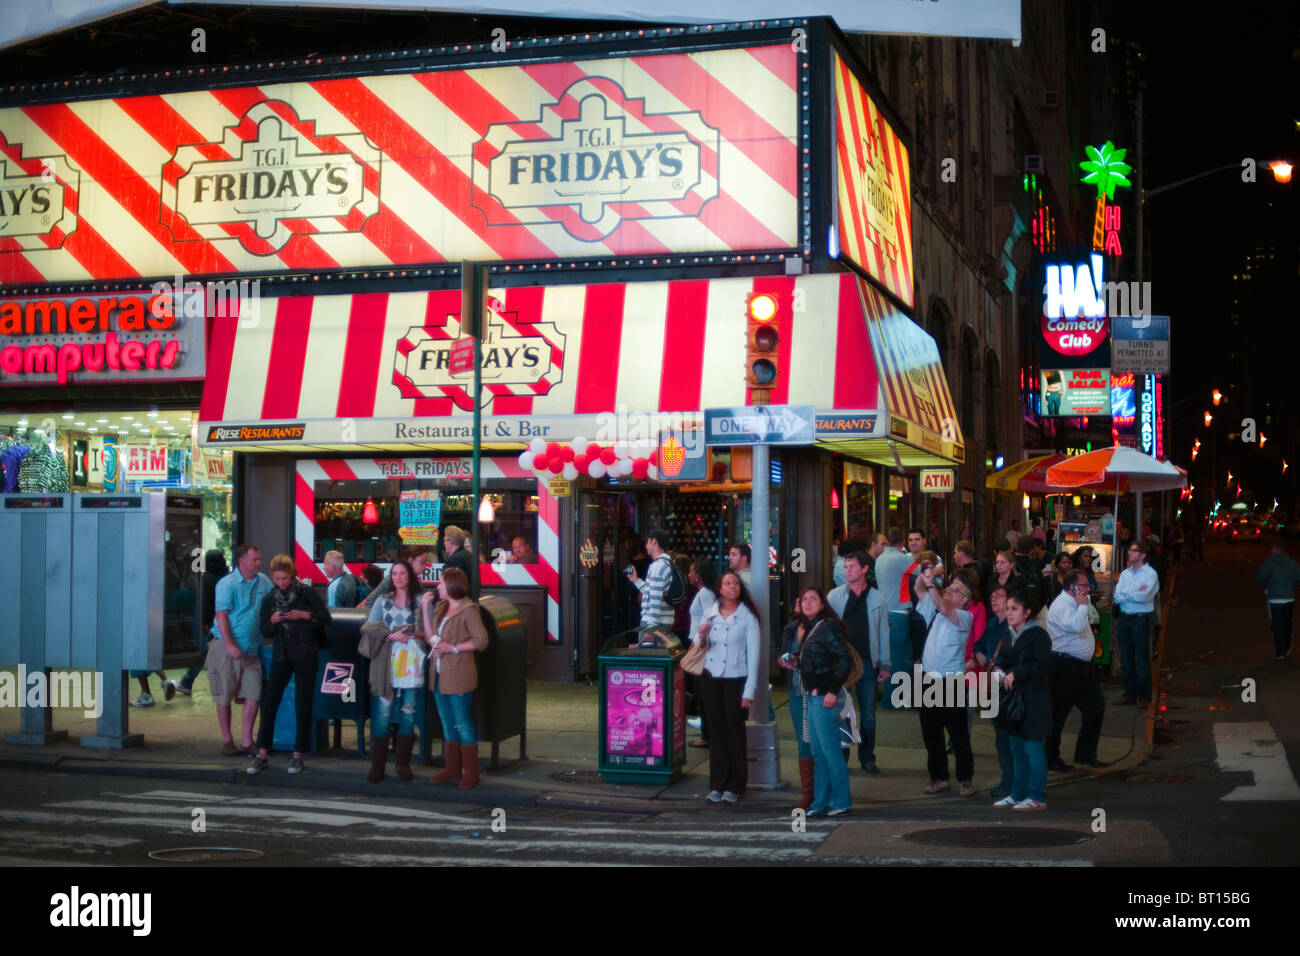 A Times Square branch of the T.G.I. Friday's restaurant chain Stock Photo